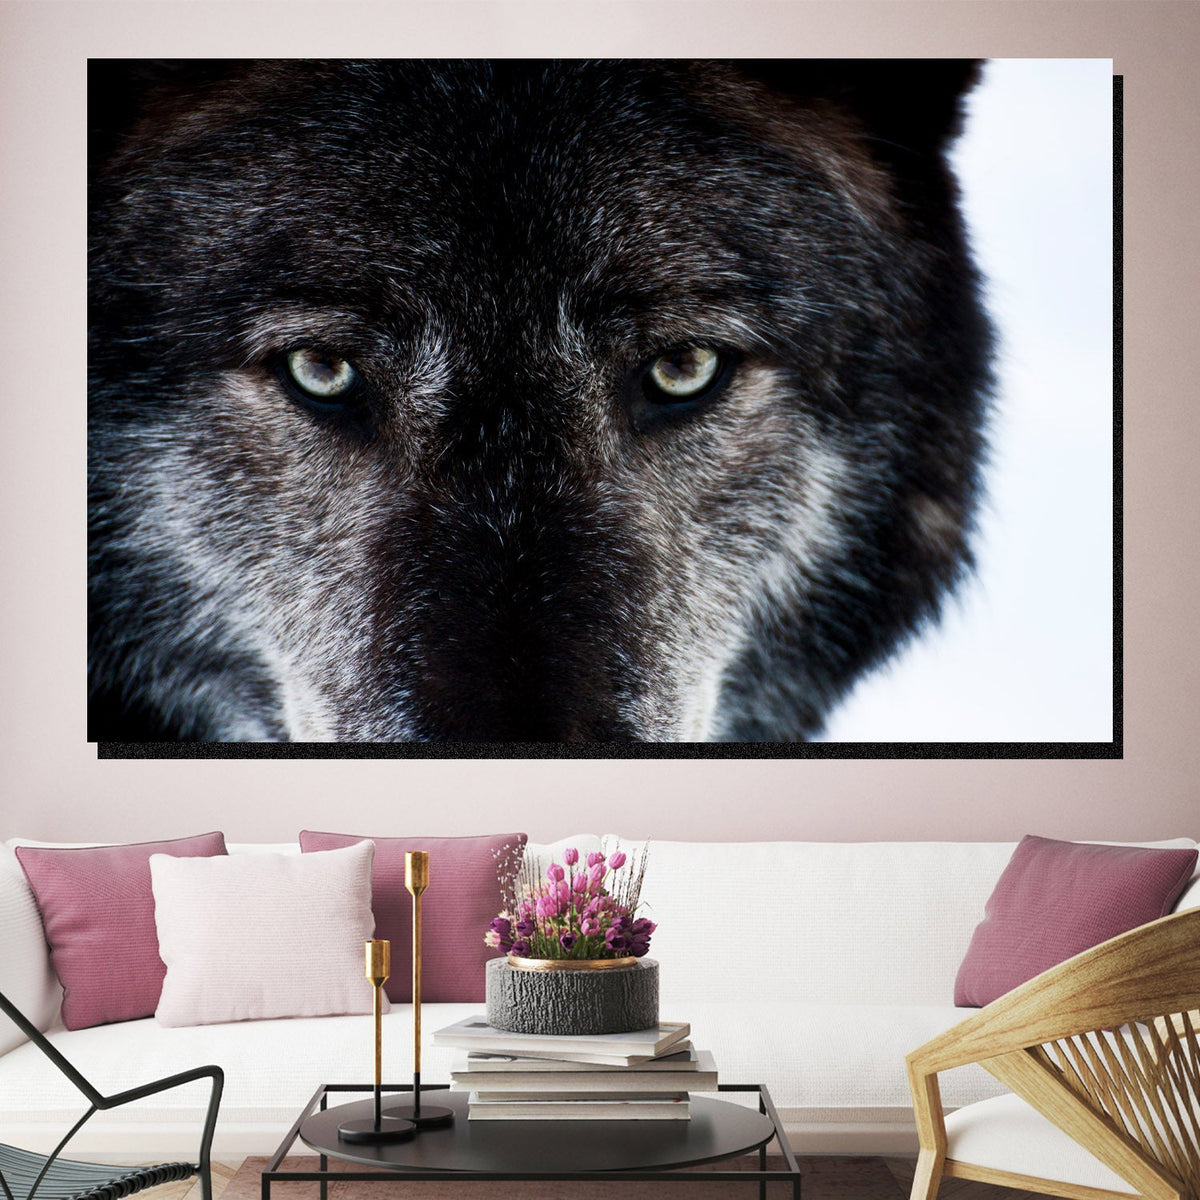 https://cdn.shopify.com/s/files/1/0387/9986/8044/products/WolfWatchCanvasArtprintStretched-2.jpg